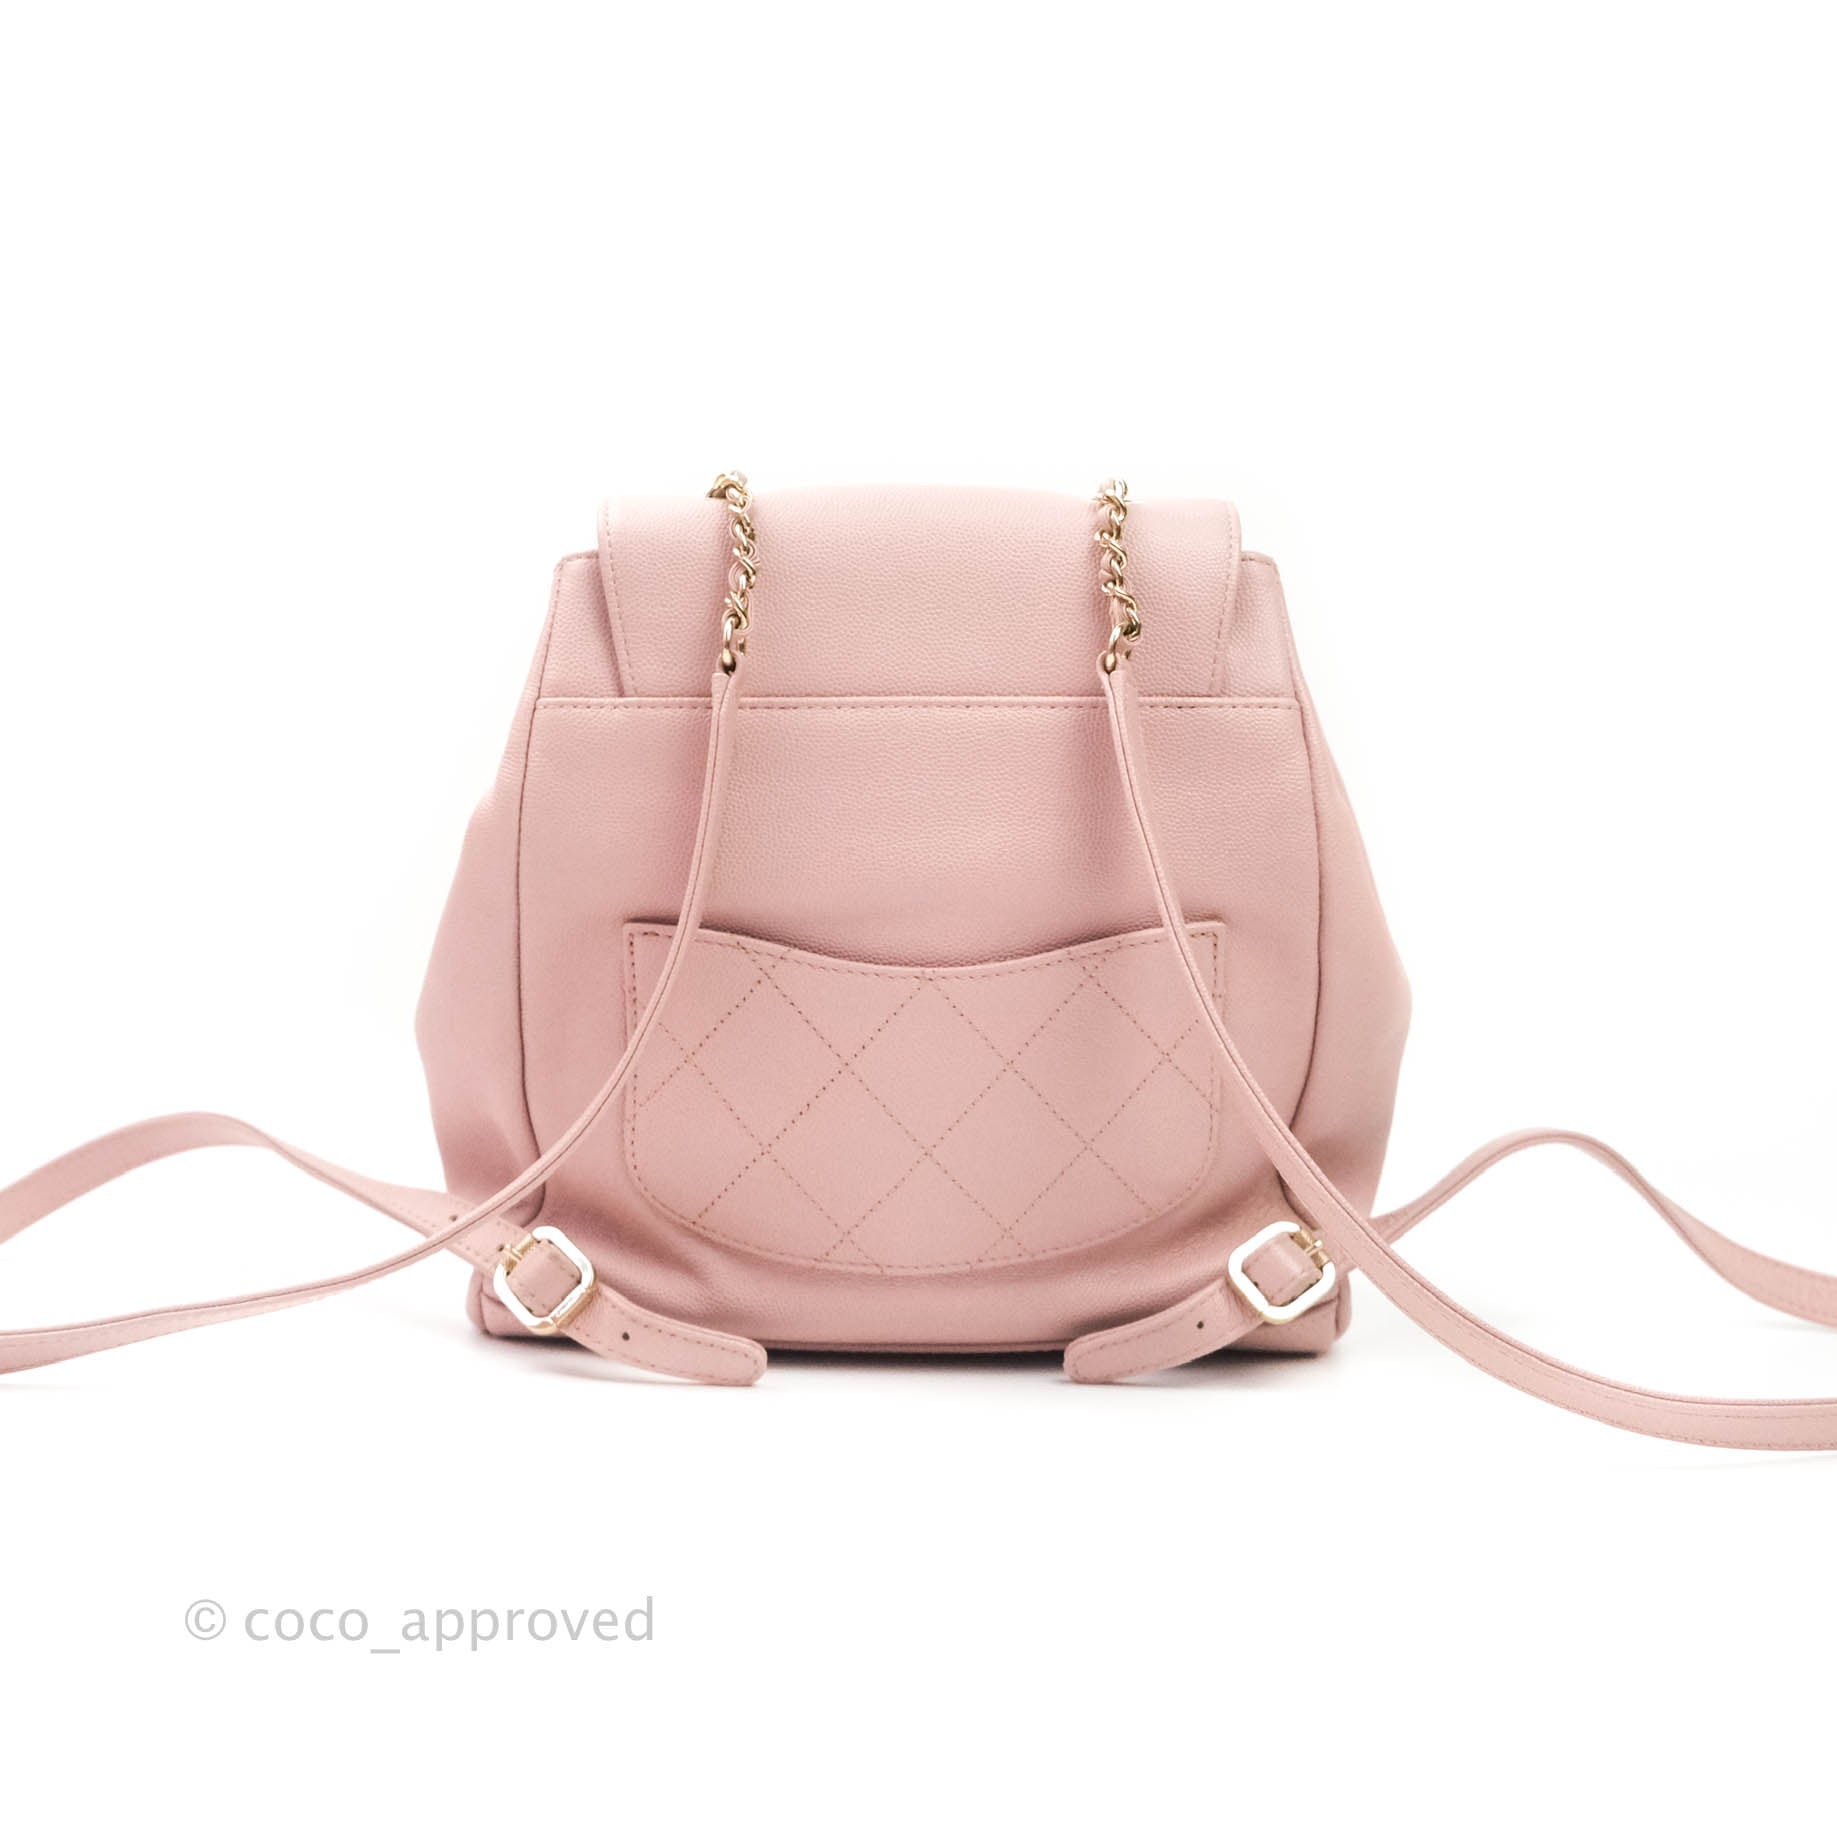 🆕 AUTHENTIC CHANEL SMALL BUSINESS AFFINITY FLAP PINK CAVIAR IN